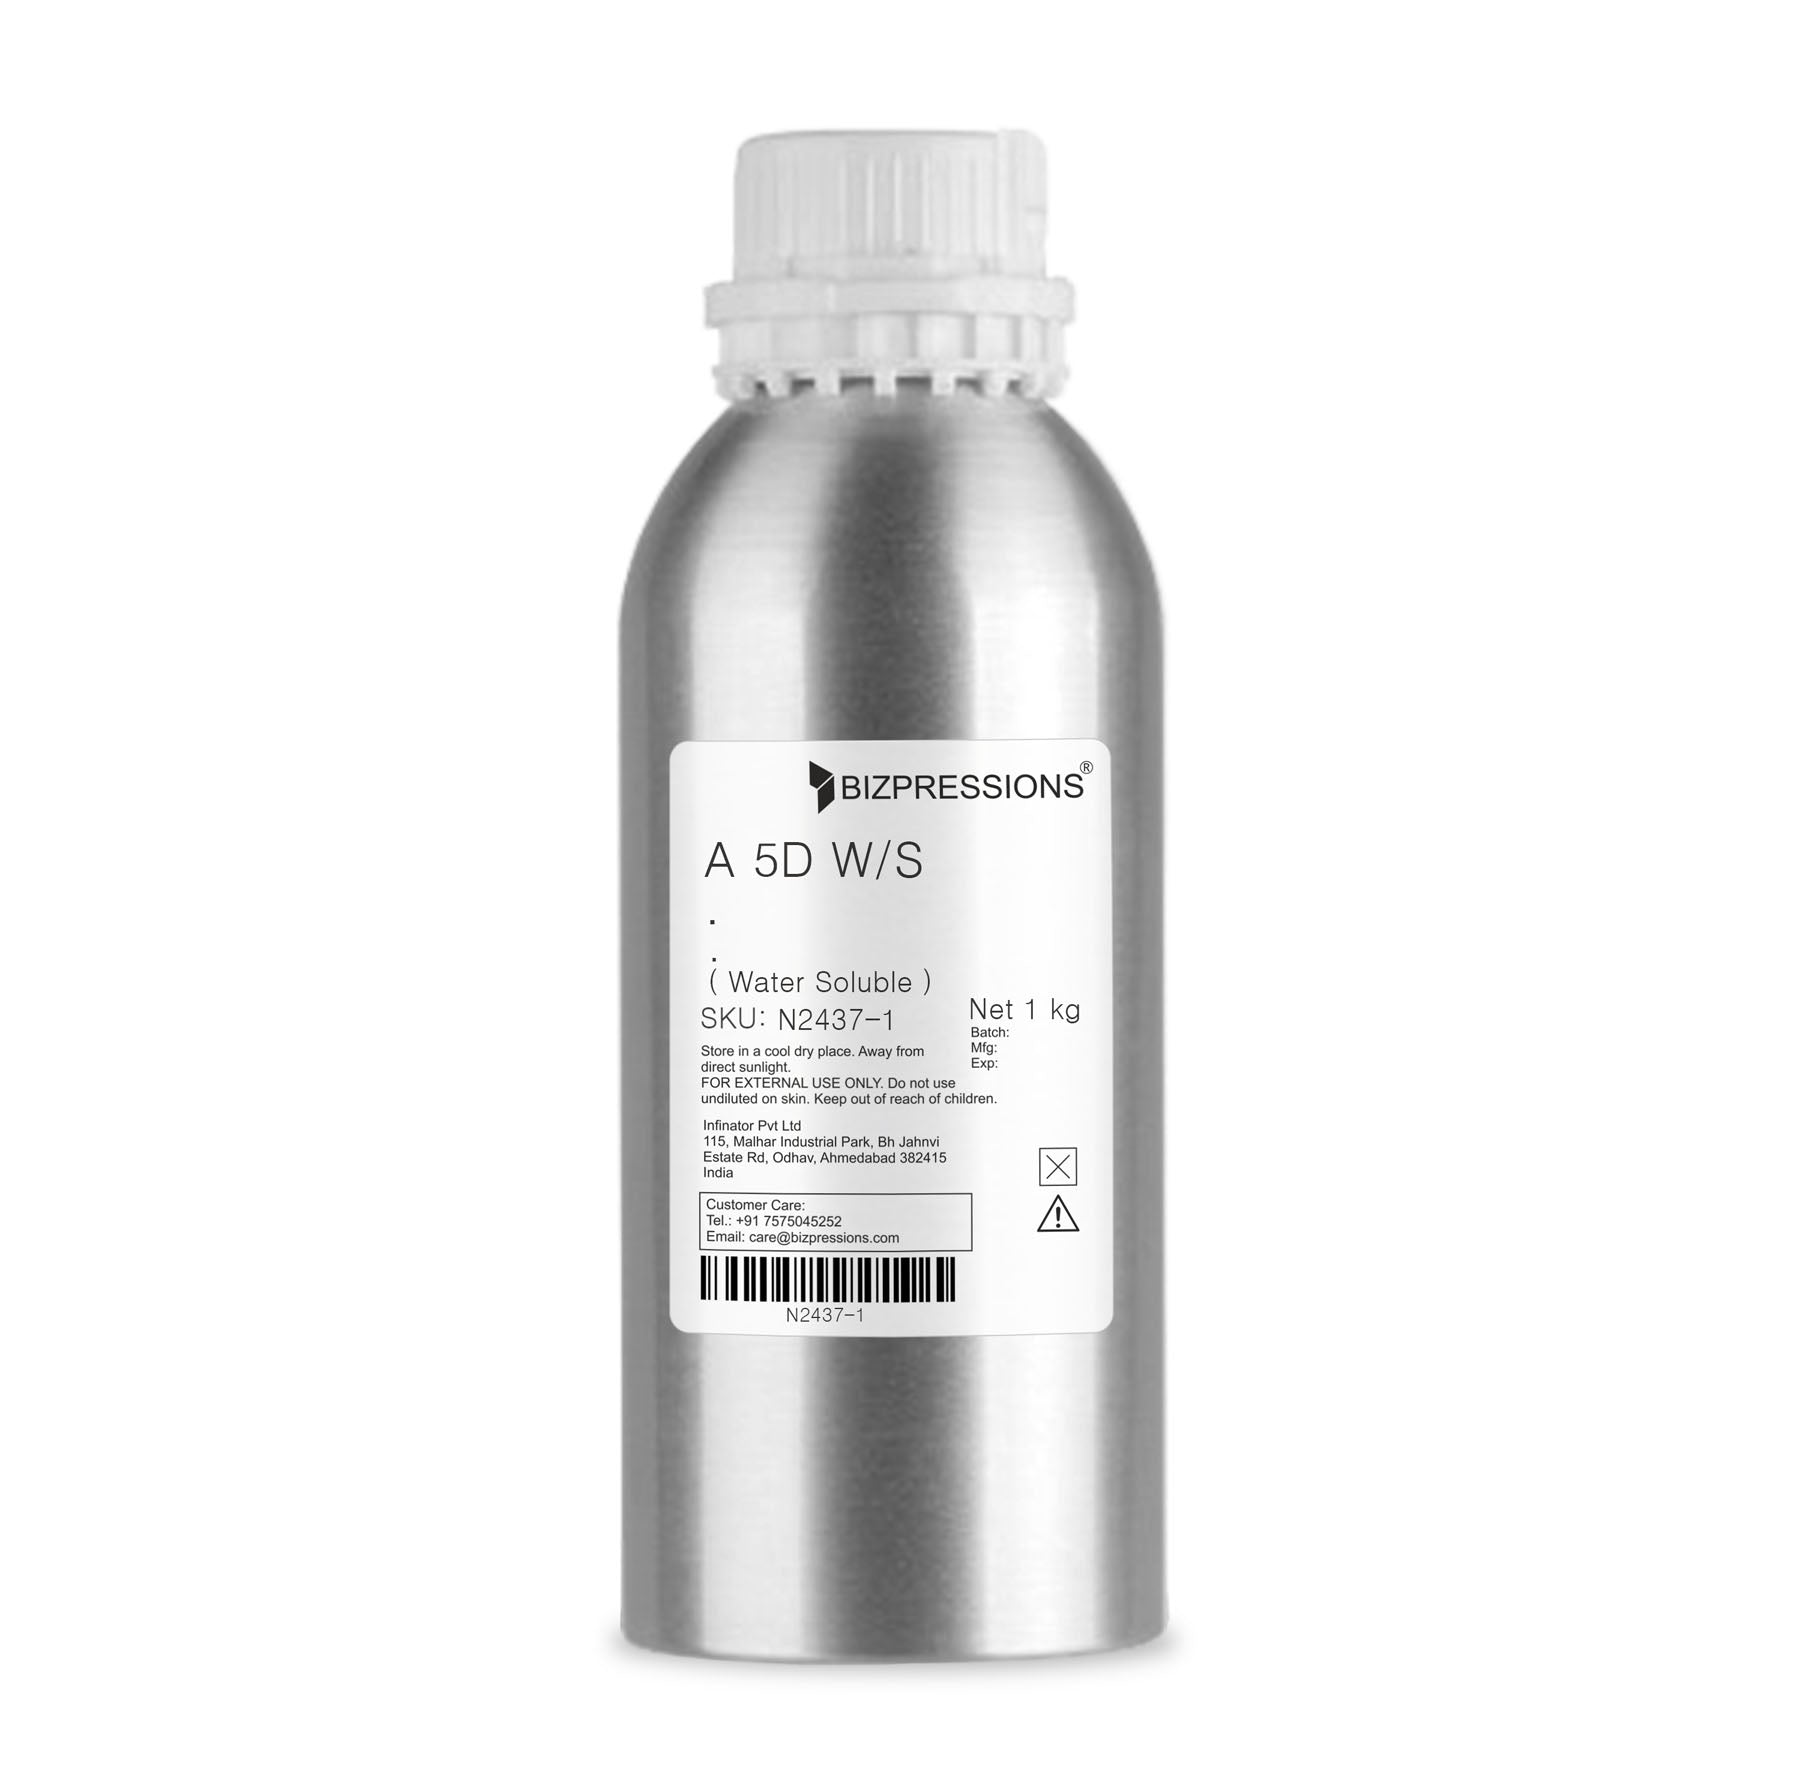 A5D W/S - Fragrance ( Water Soluble ) - 1 kg